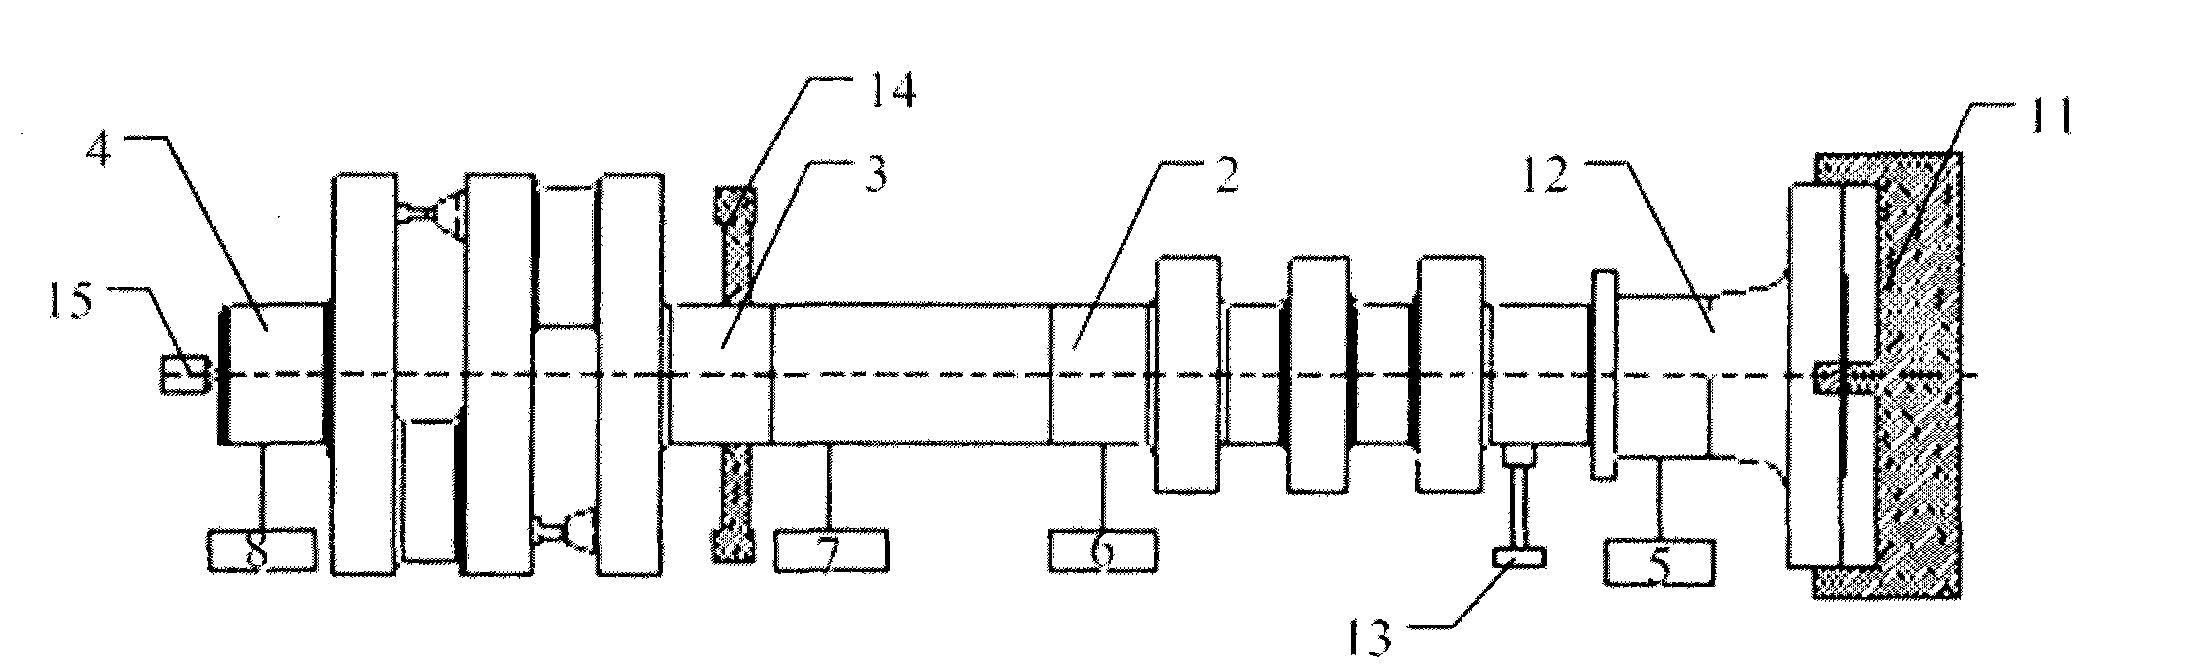 Cold welding and repairing technology of crankshaft cracks of large reciprocating compressor by manual argon arc welding